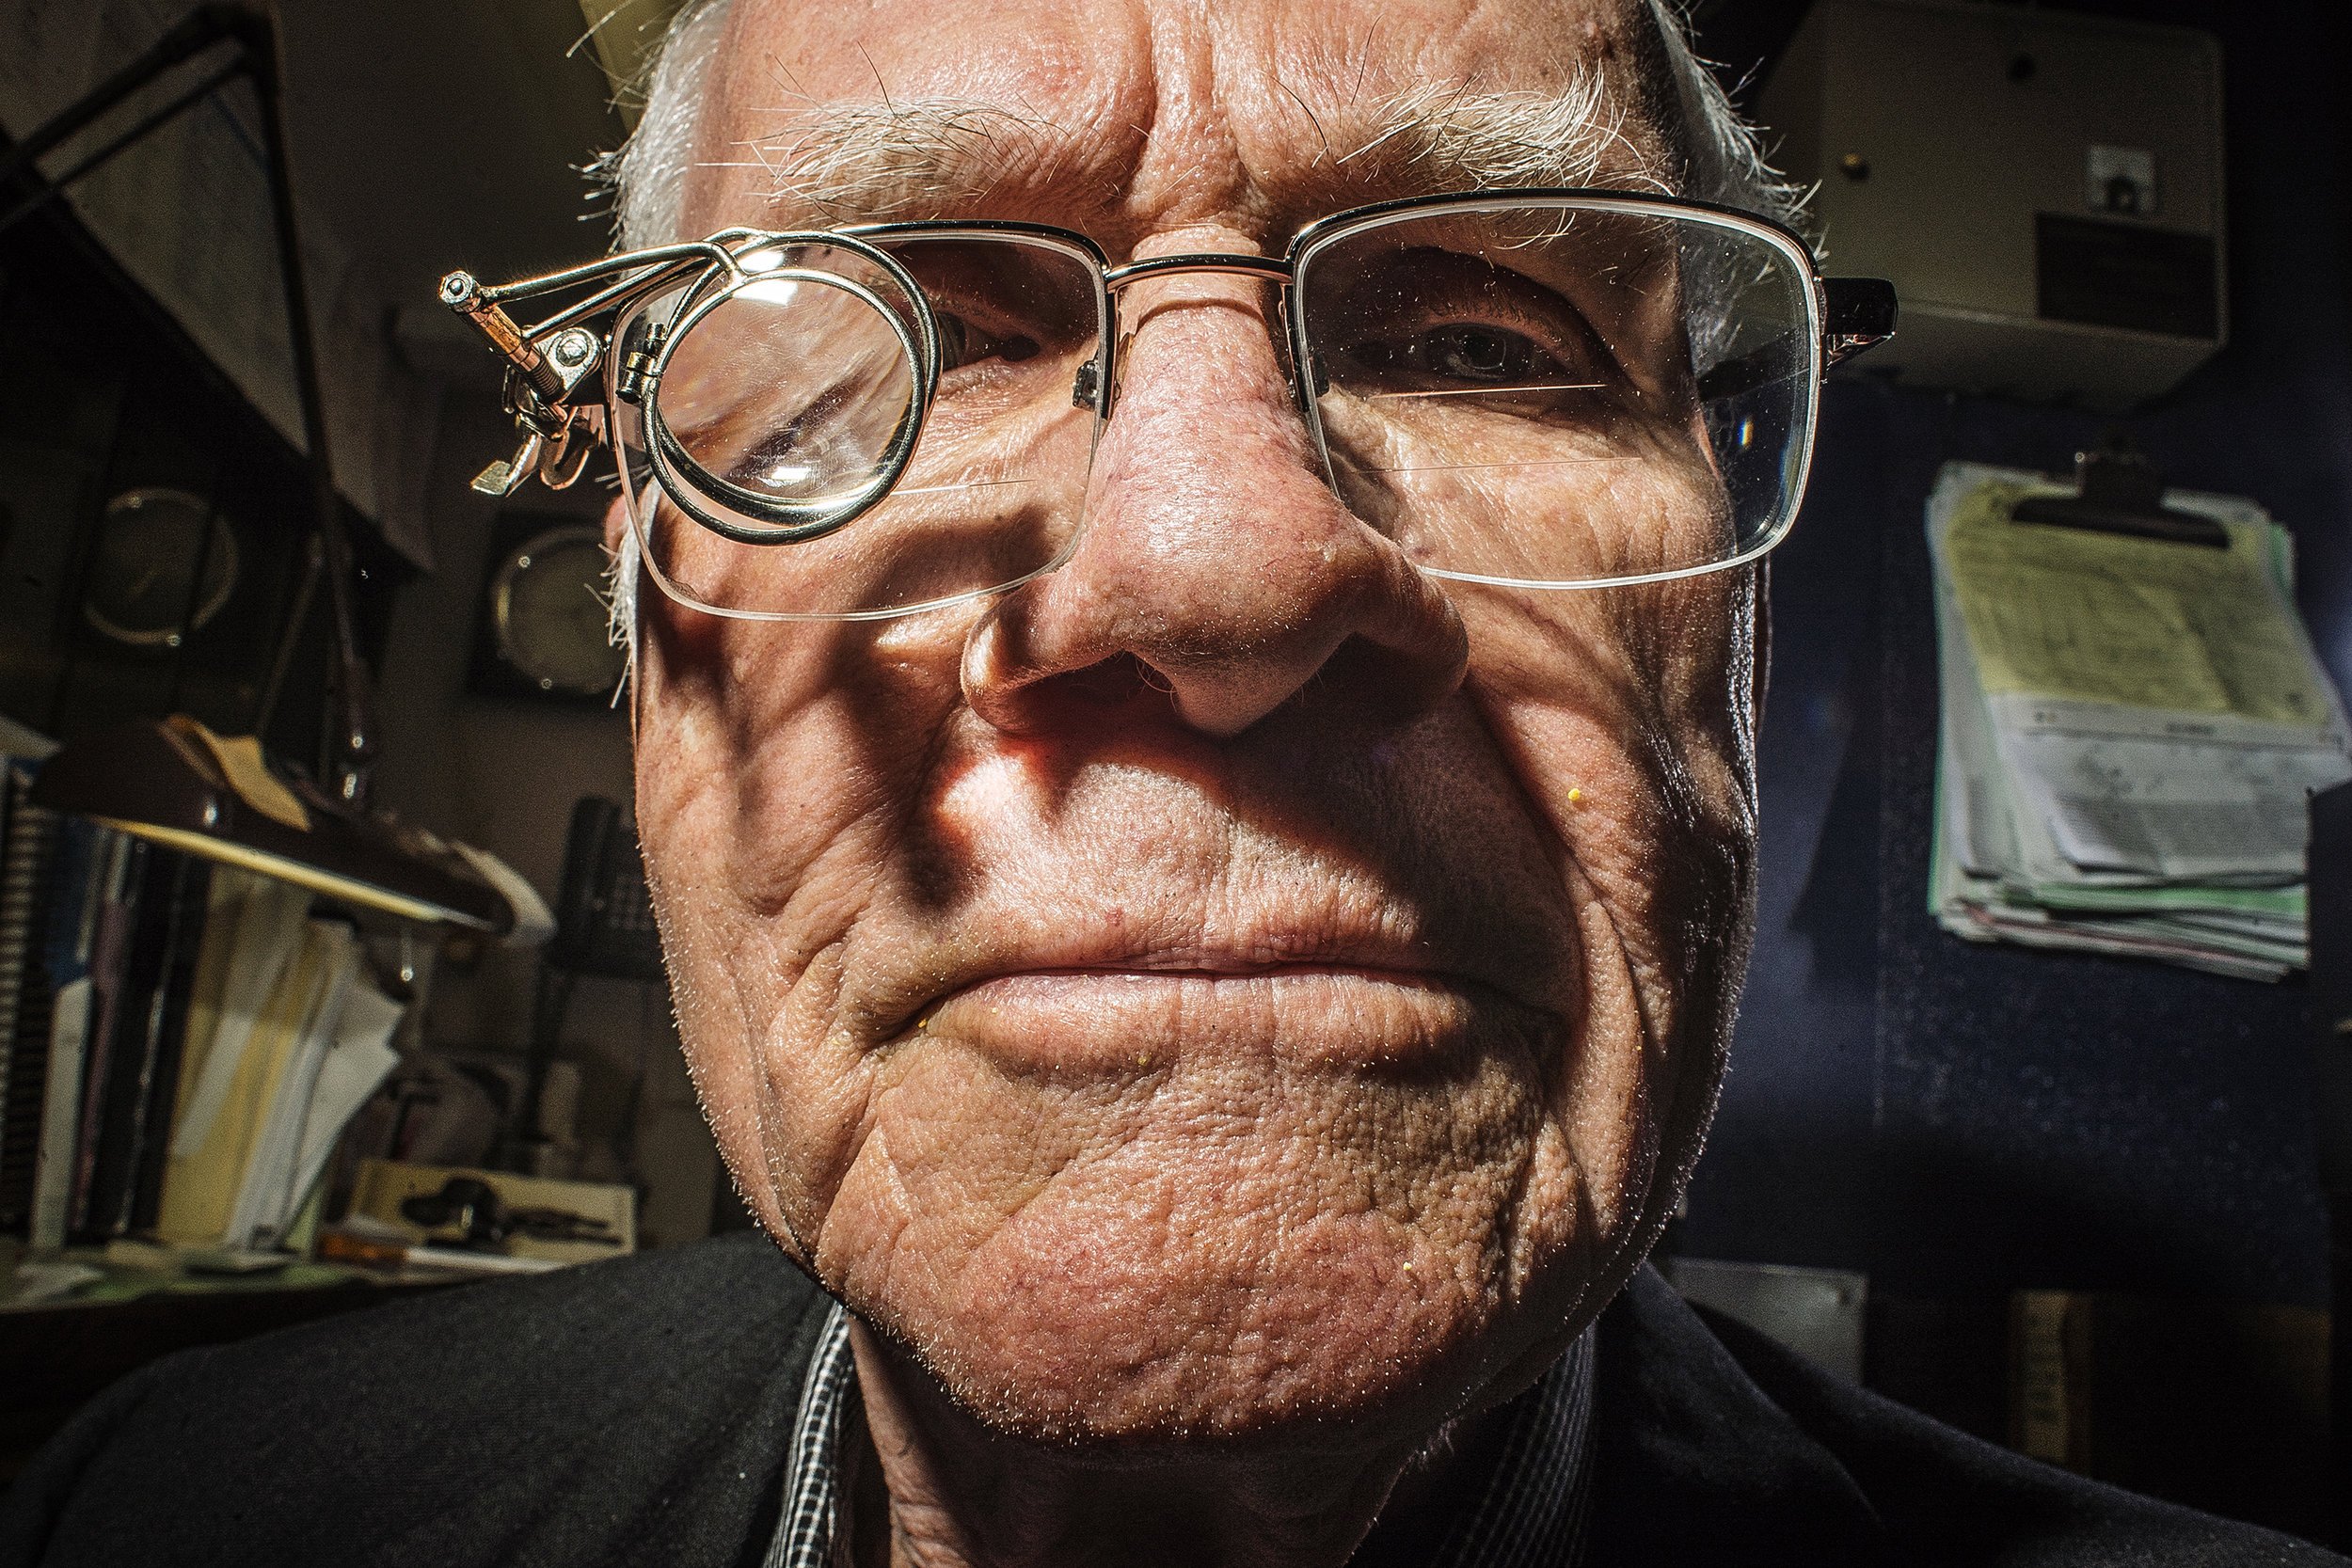  Iowa City Jeweler, Willa Dickens, poses for a portrait in his office on Thursday, Jan. 19, 2017. He's been working In the business for 75 years and says, "It's a challenge everyday with the beautiful and interesting things in the jewelry business. H